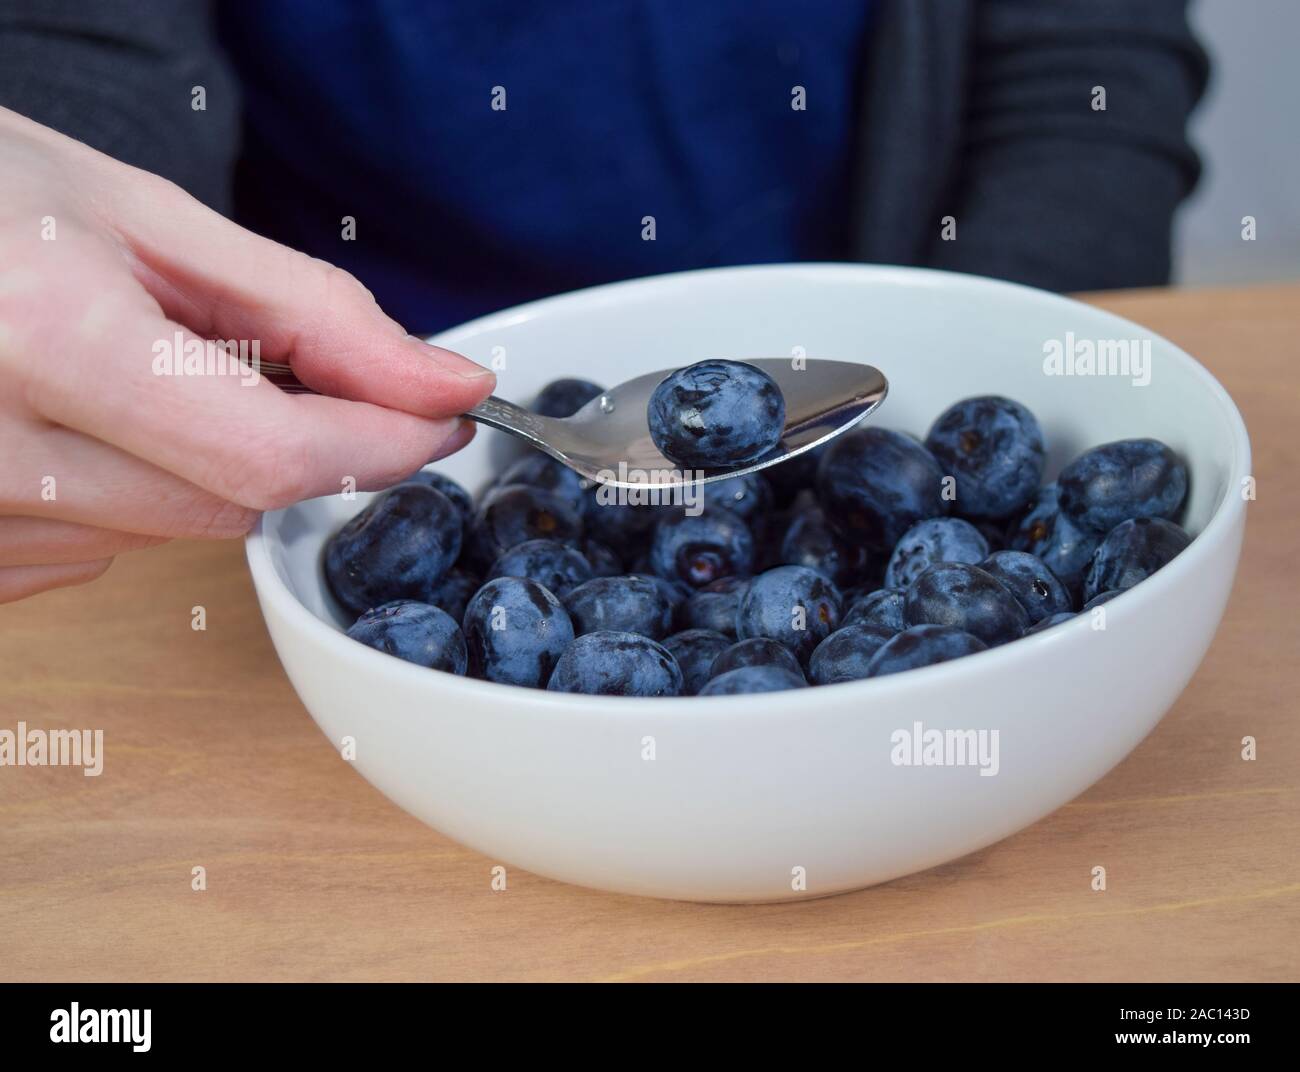 Closeup of Caucasian woman dipping a spoon into a bowl of fresh organic blueberries. The bowl of blueberries rests on a rustic wooden table. Stock Photo